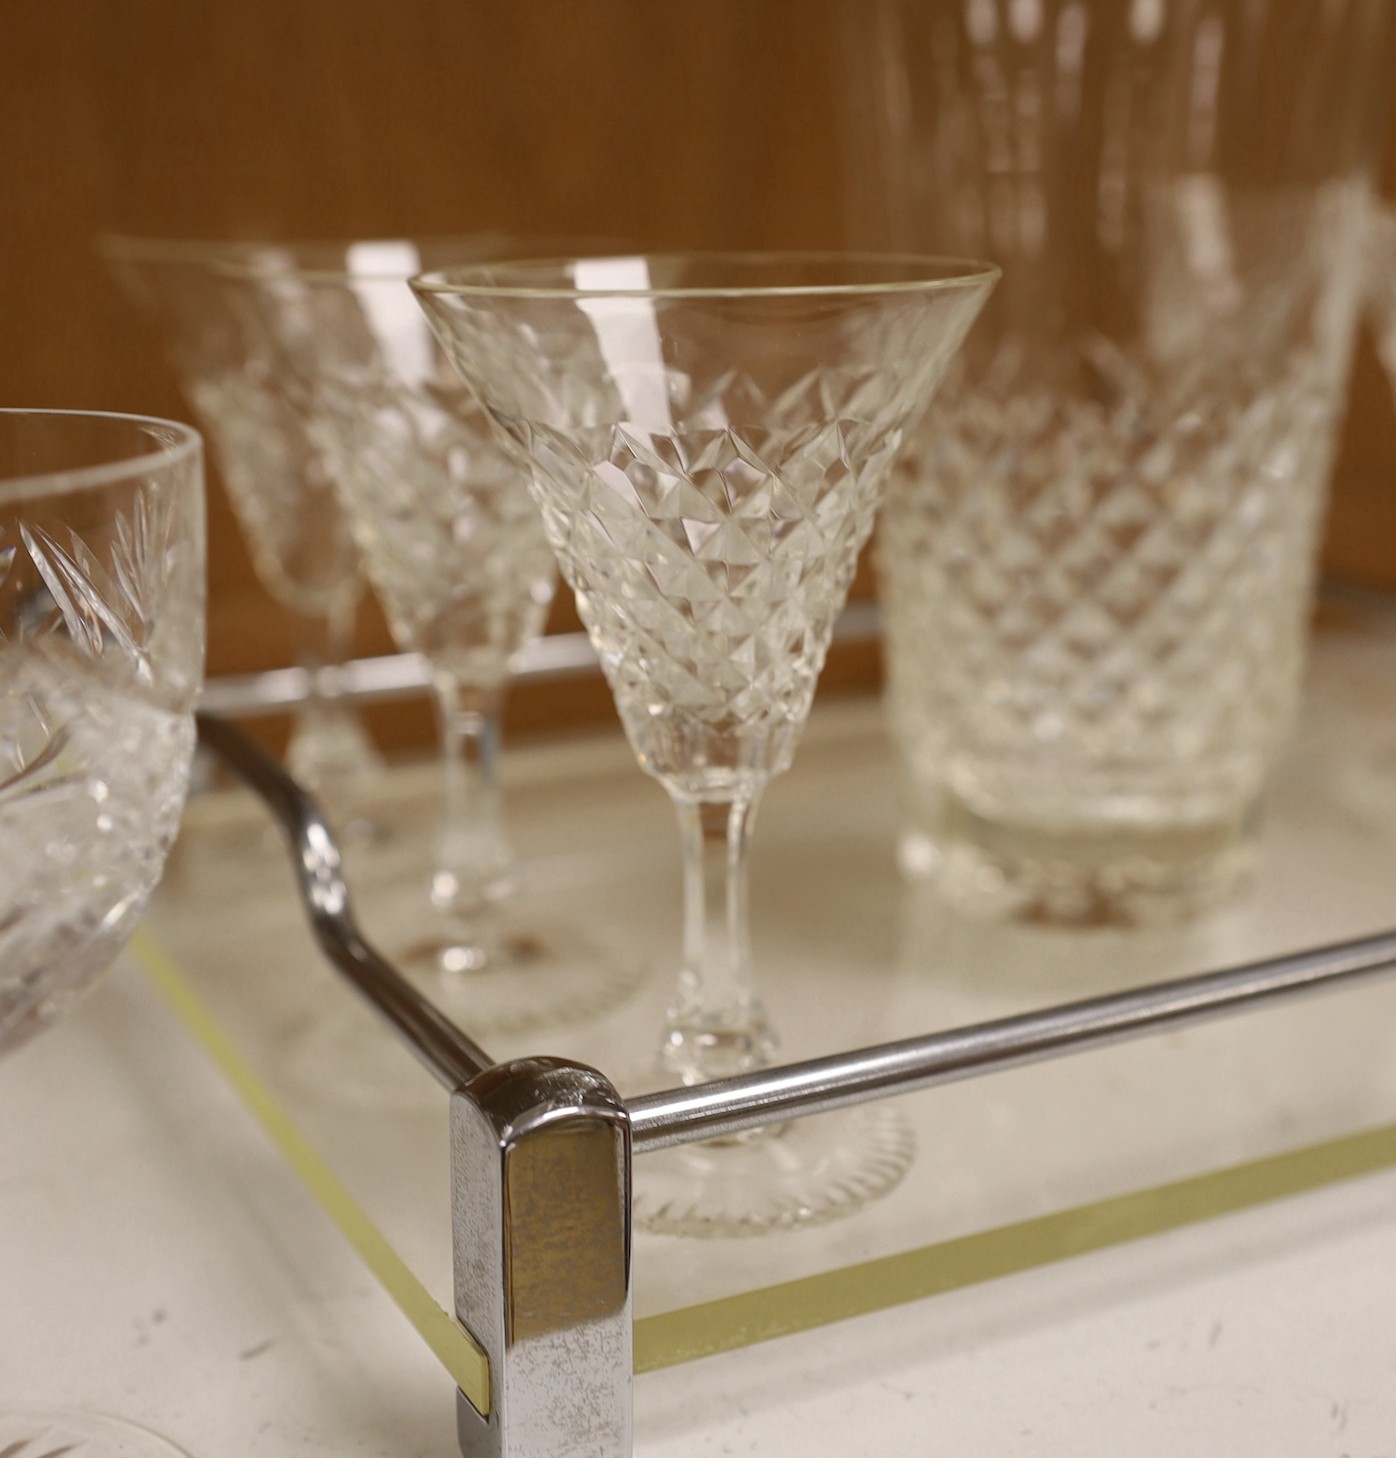 A mid century chrome and perspex drinks tray with 6 cocktail glasses, mixing glass and 8 wine glasses